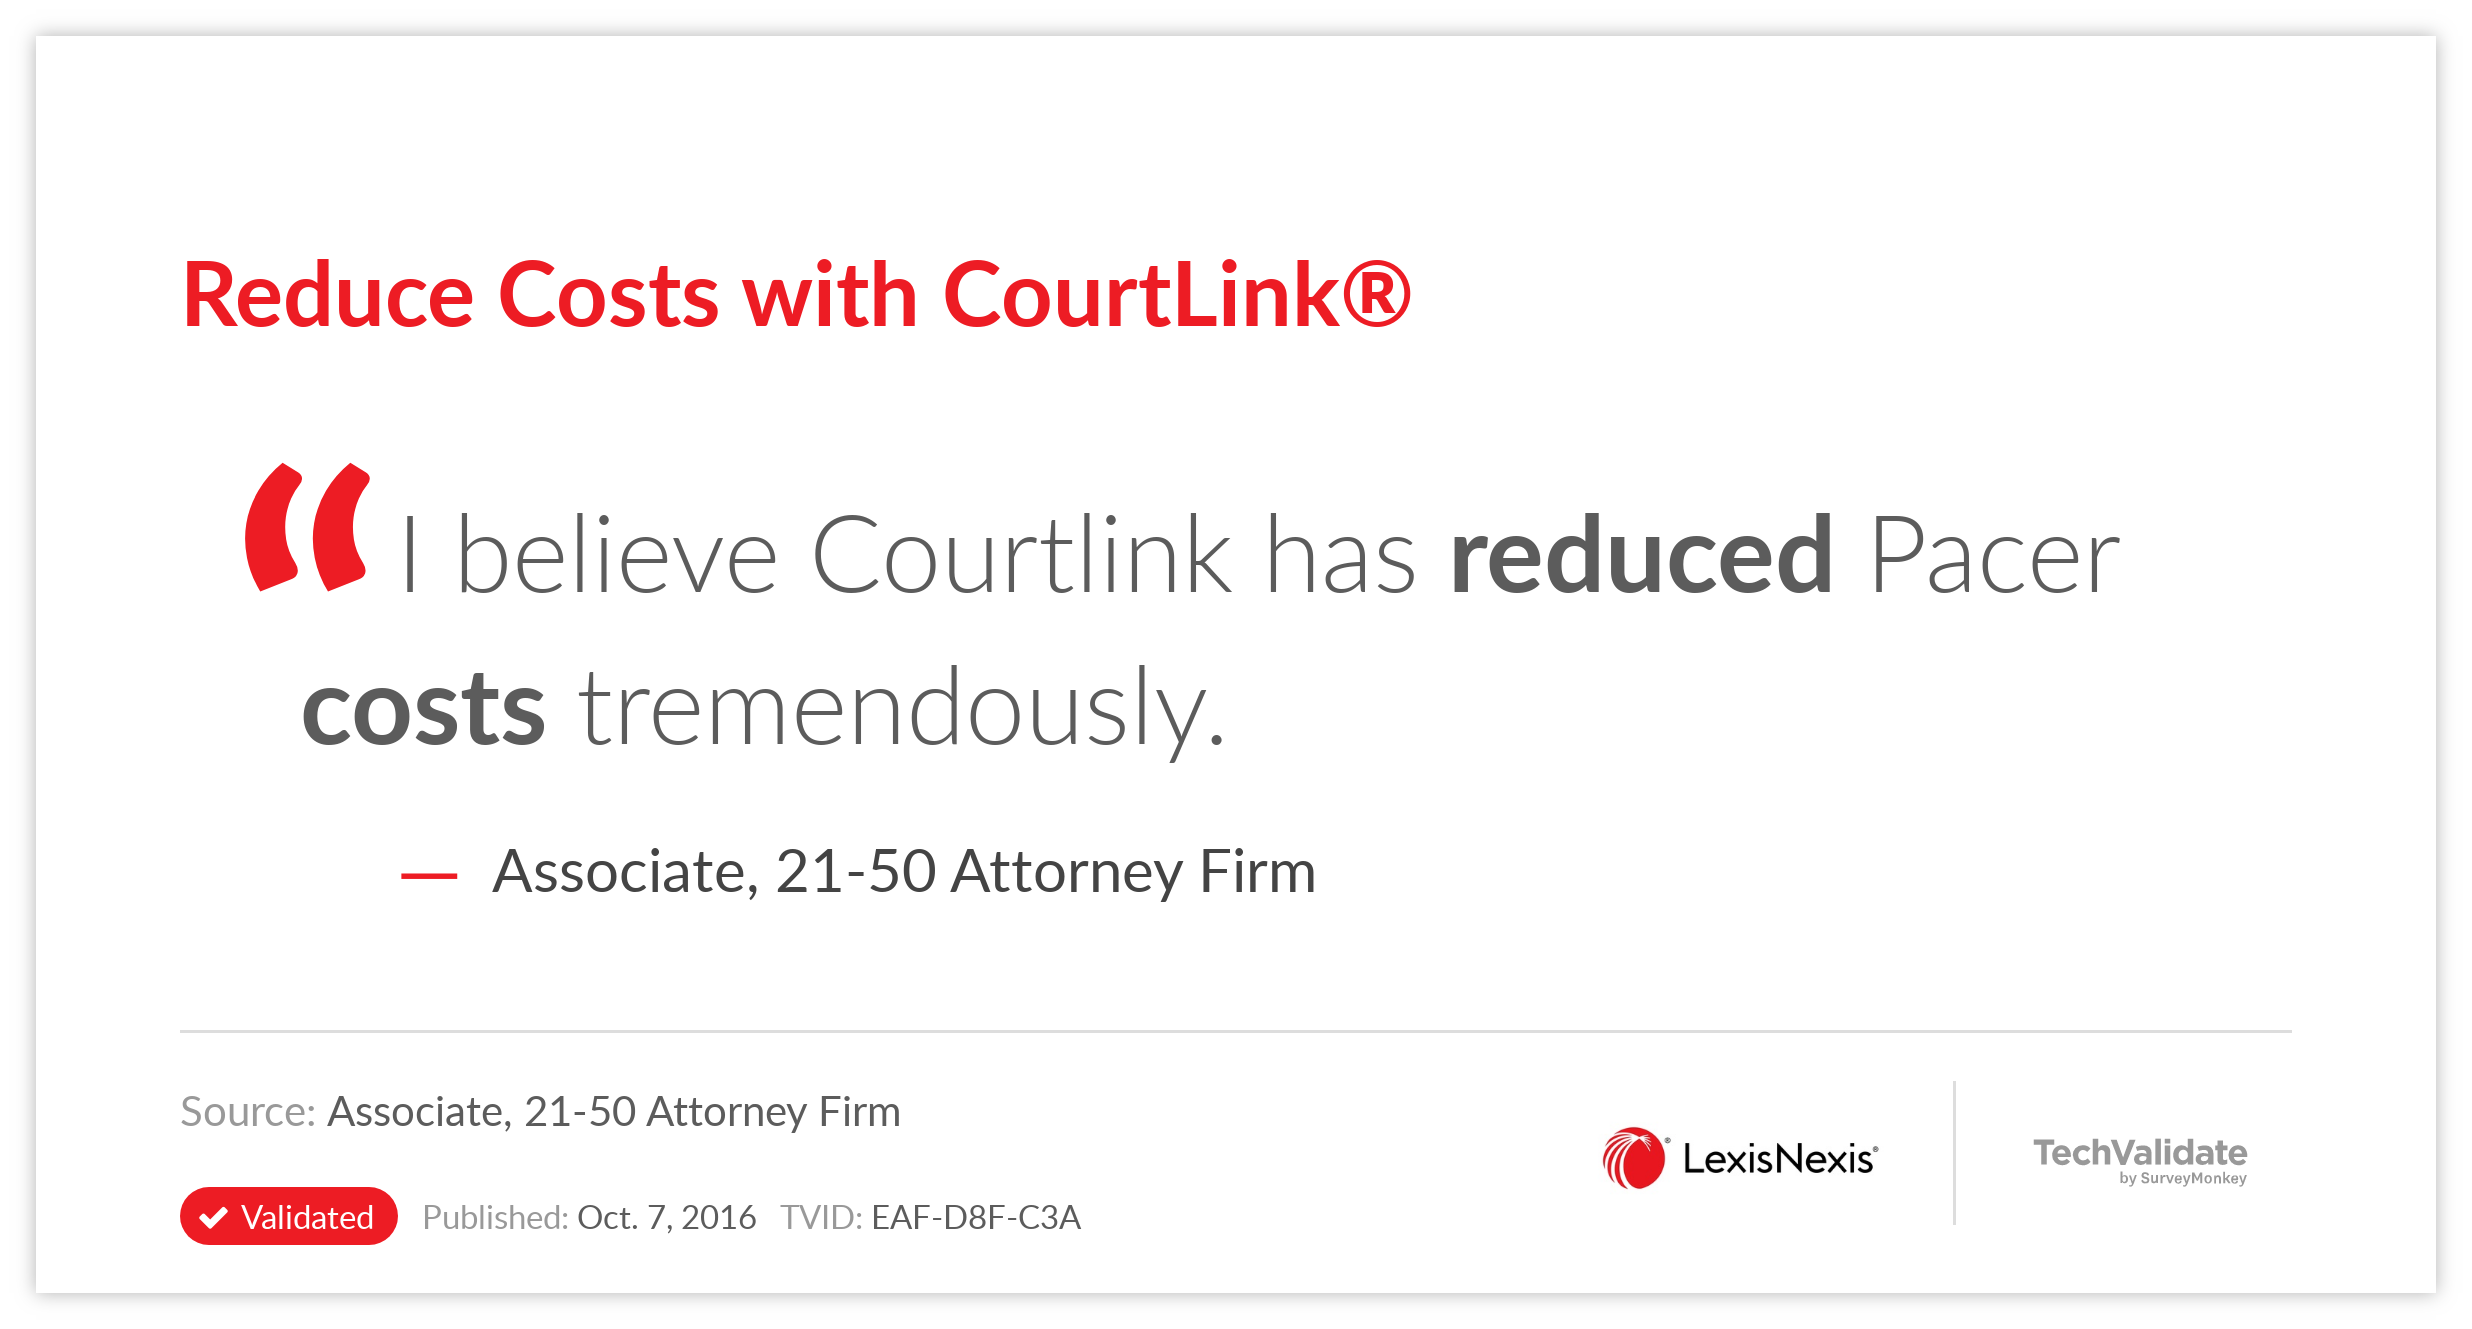 Reduce Costs with CourtLink(R)